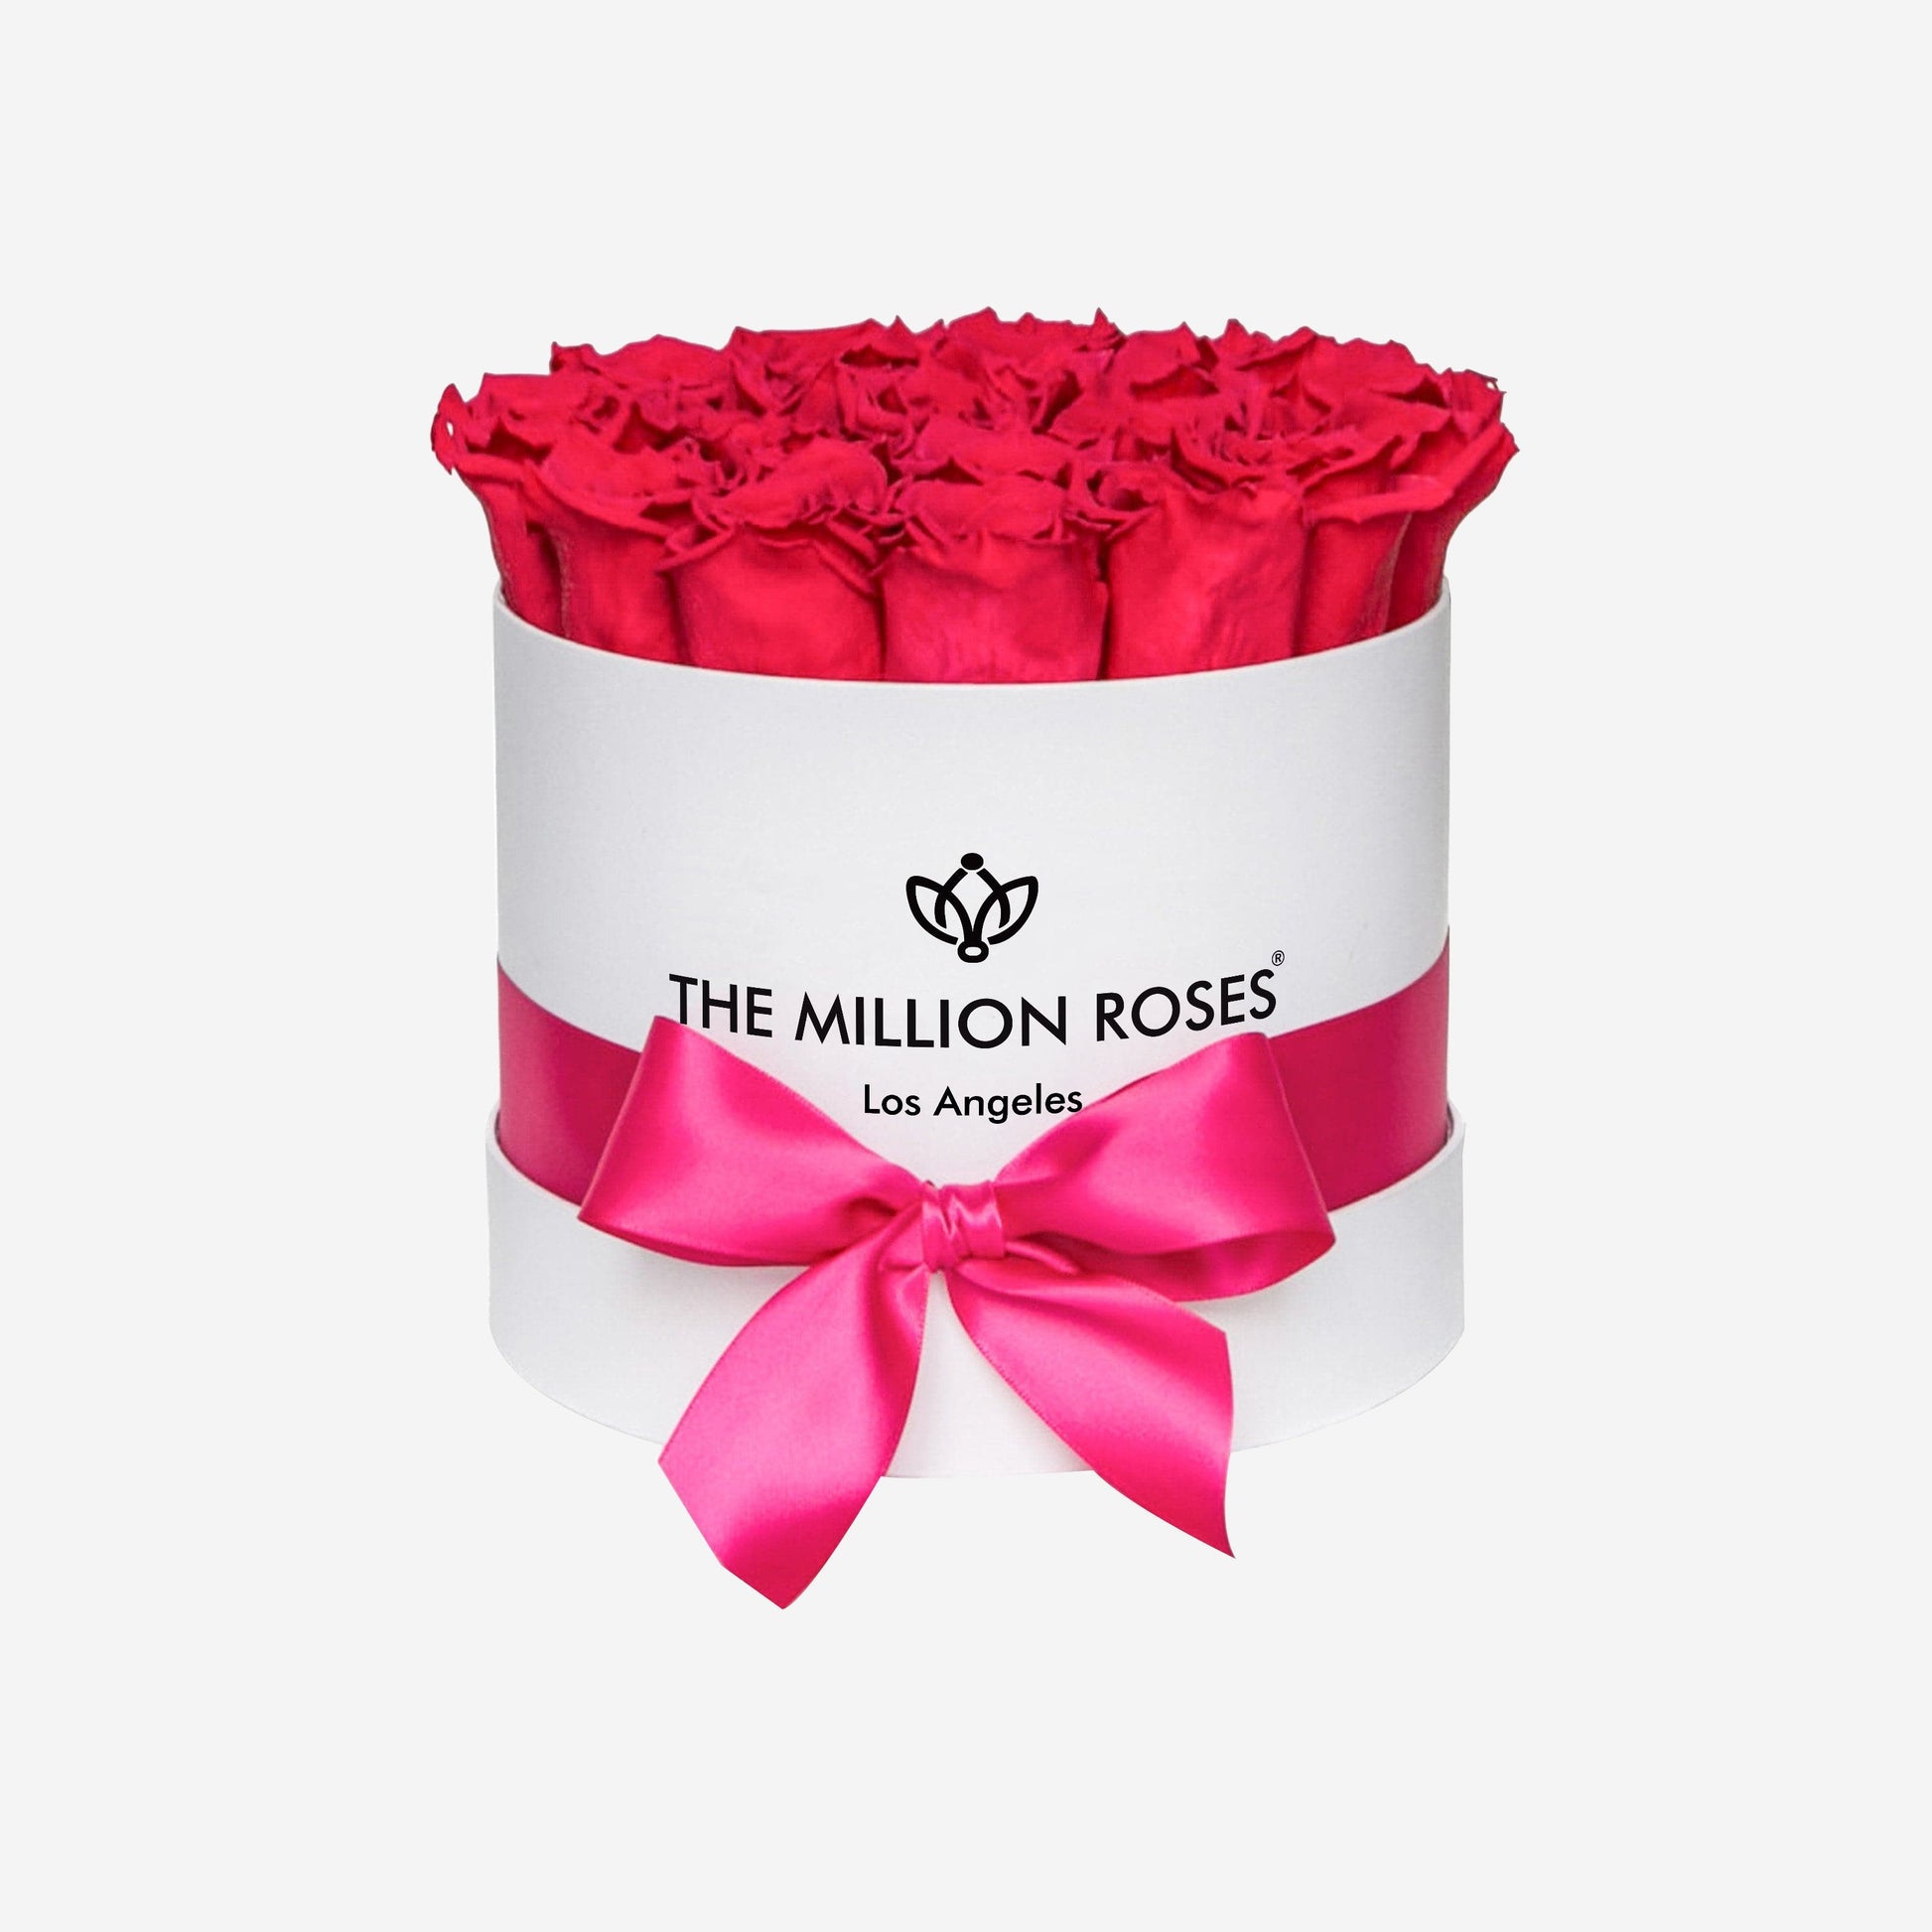 Classic White Box | Hot Pink Roses - The Million Roses